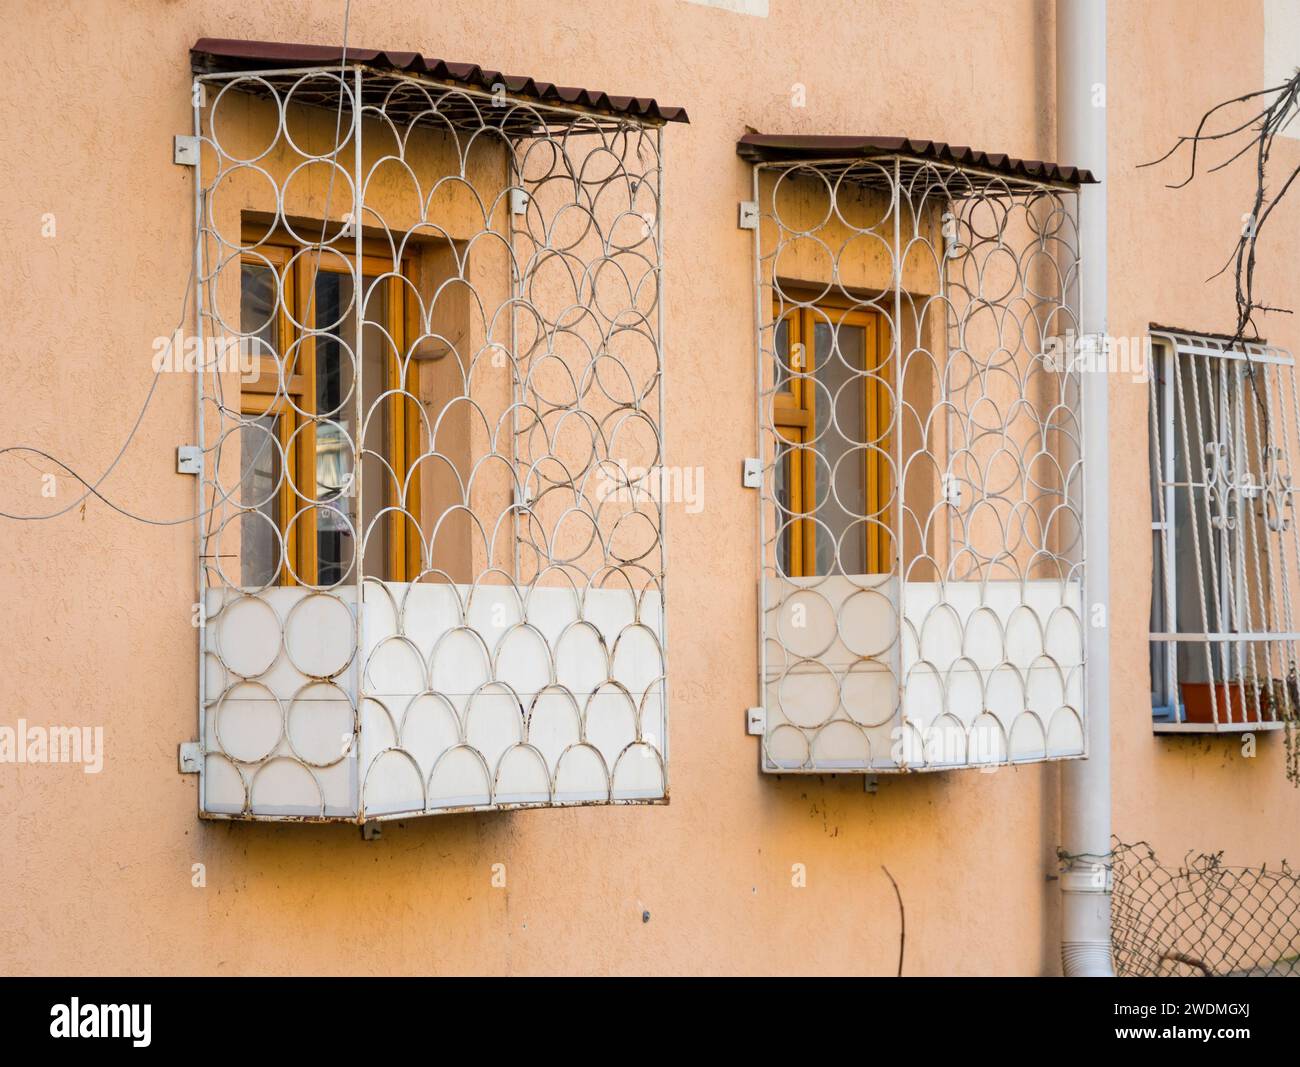 Latticed window railings in the form of a box Stock Photo